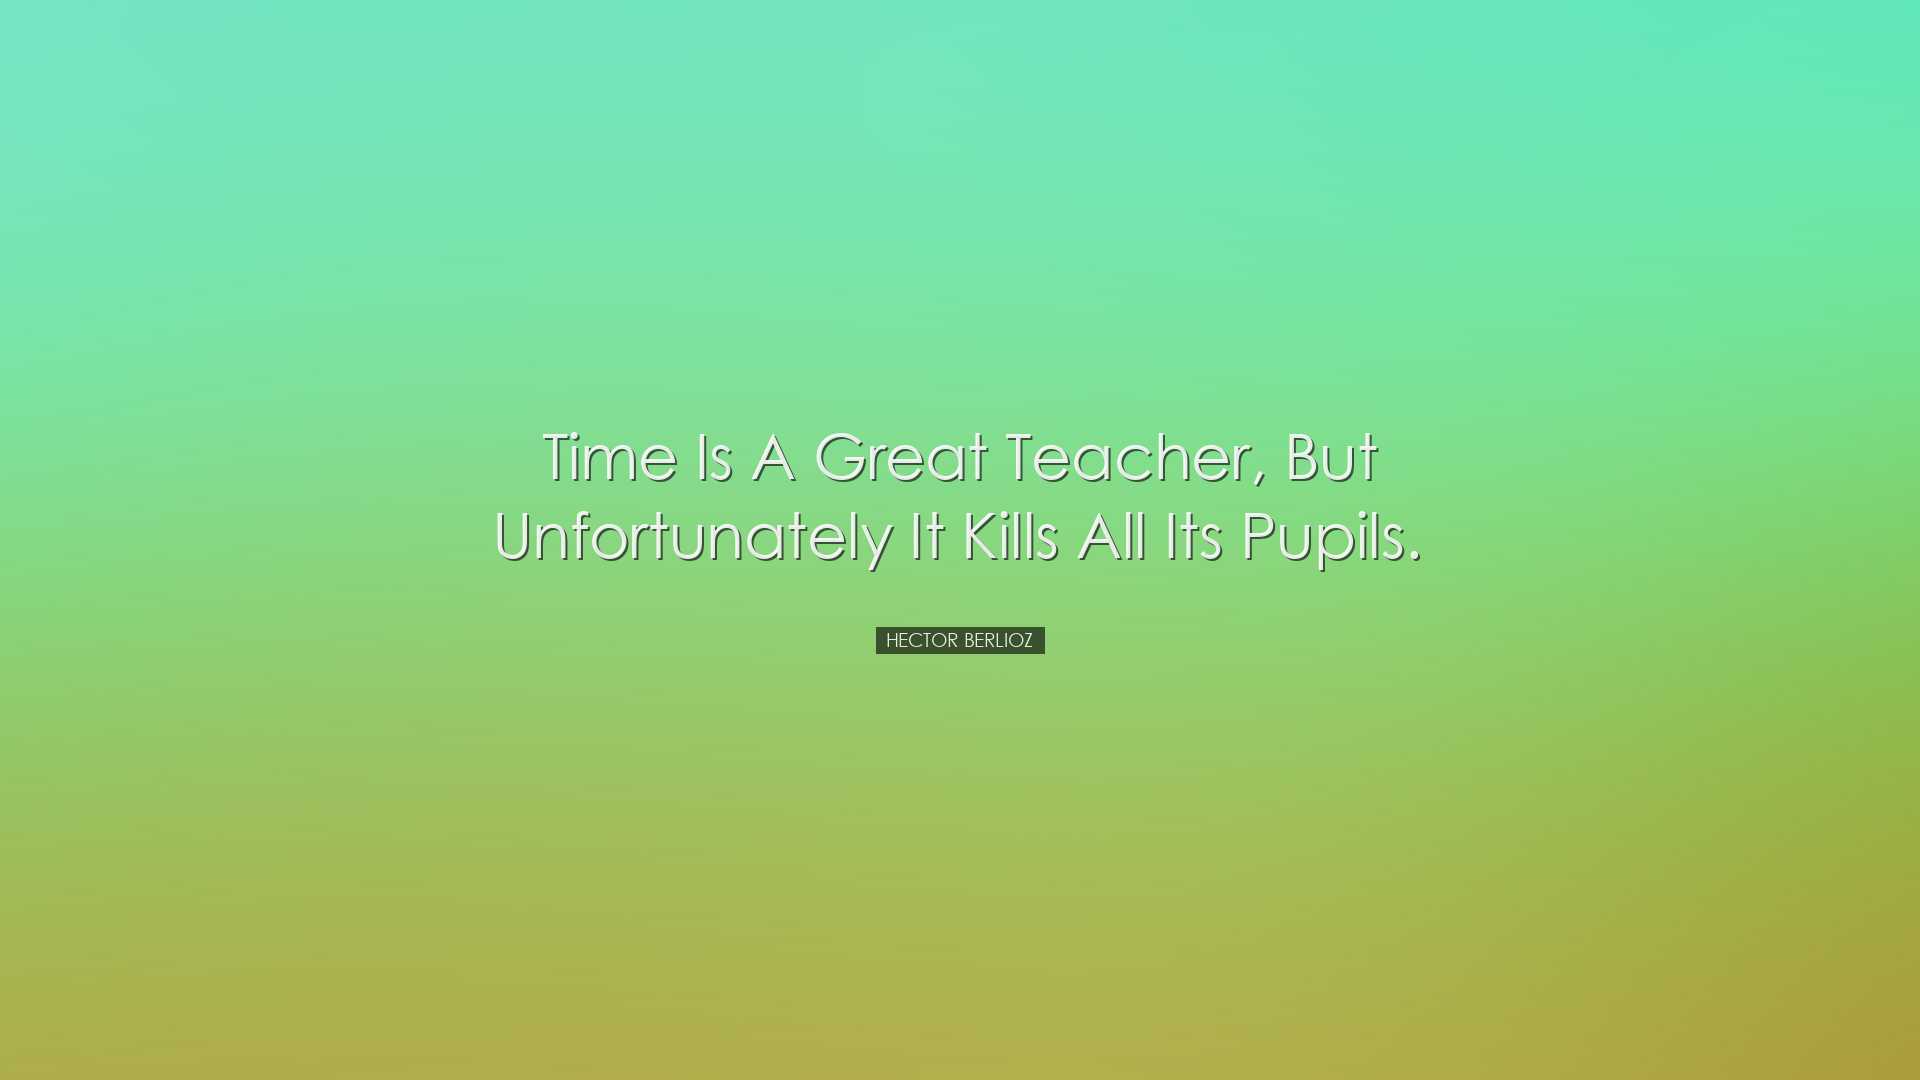 Time is a great teacher, but unfortunately it kills all its pupils